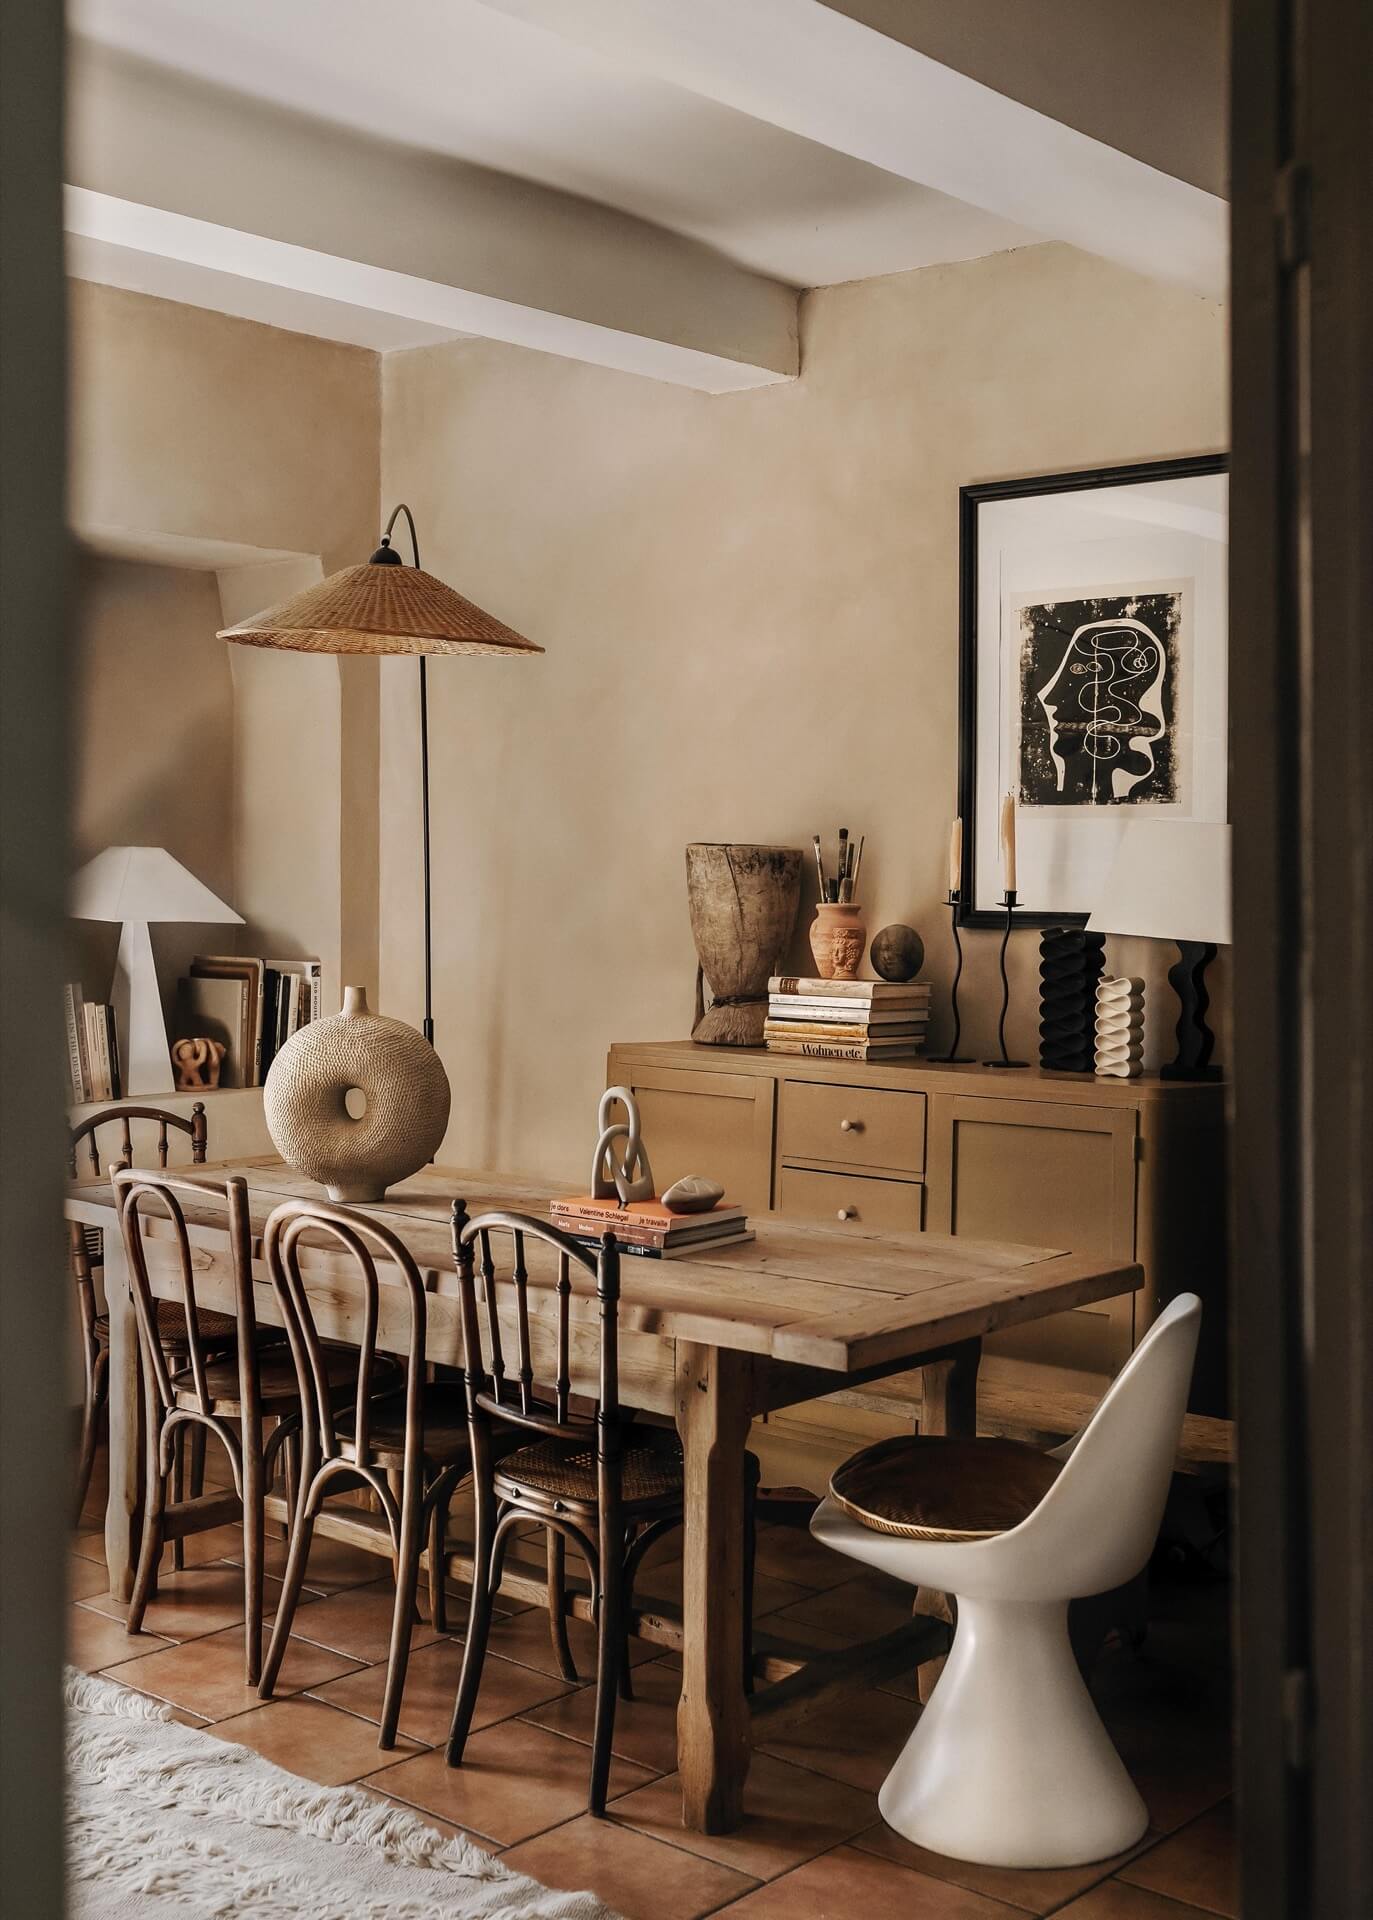 Creative Homes: Evocative, eclectic and carefully curated interiors by photographer Anna Malmberg and stylist Mari Strenghielm